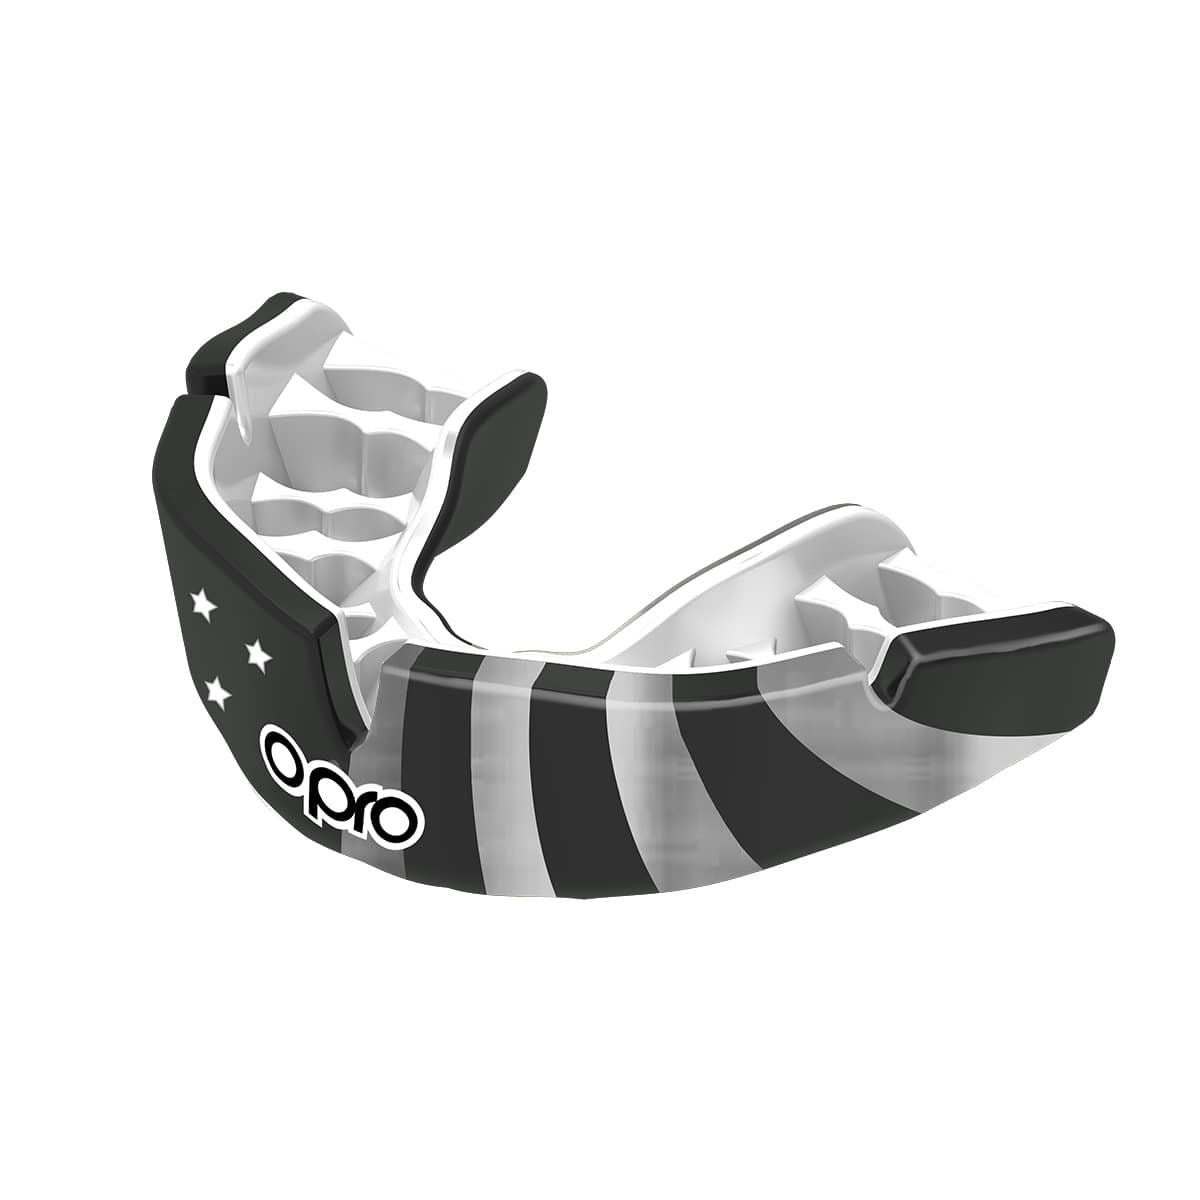 Men's Rugby Protective Mouthguard Opro Instant Custom Fit Countries 2022 USA Silver